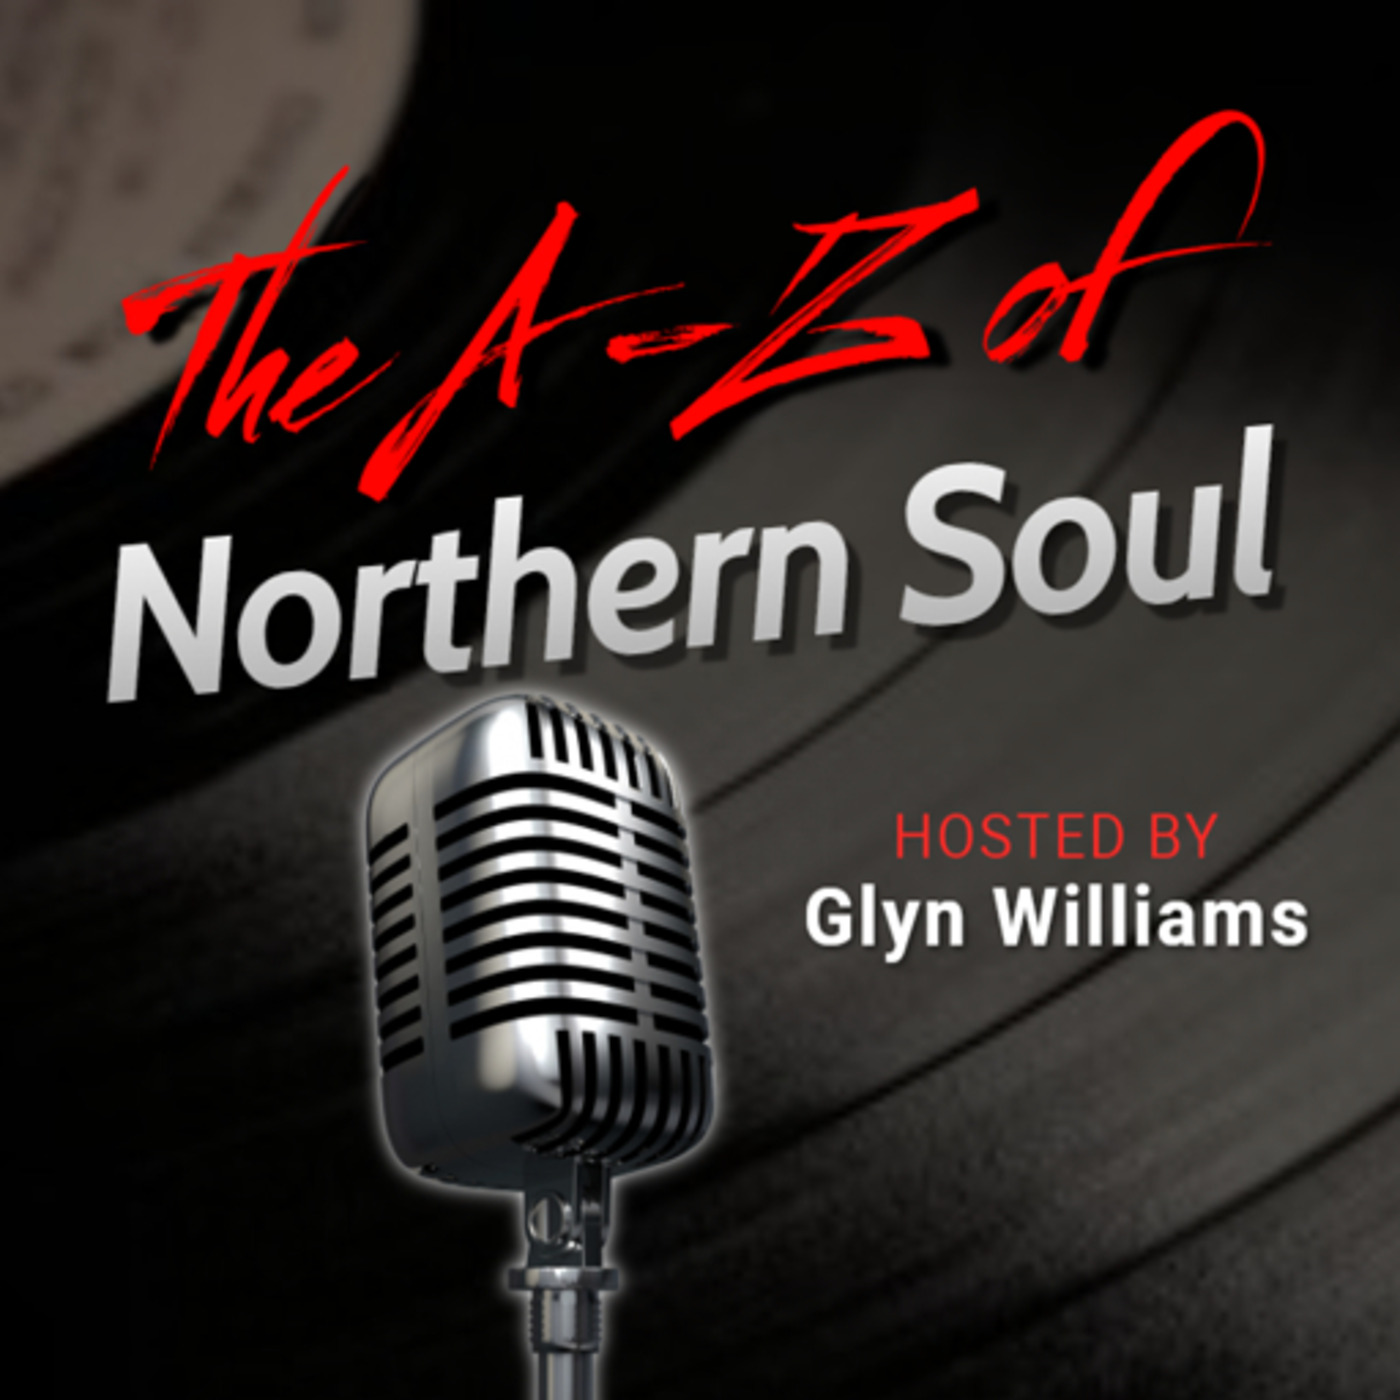 The A-Z of Northern Soul E019